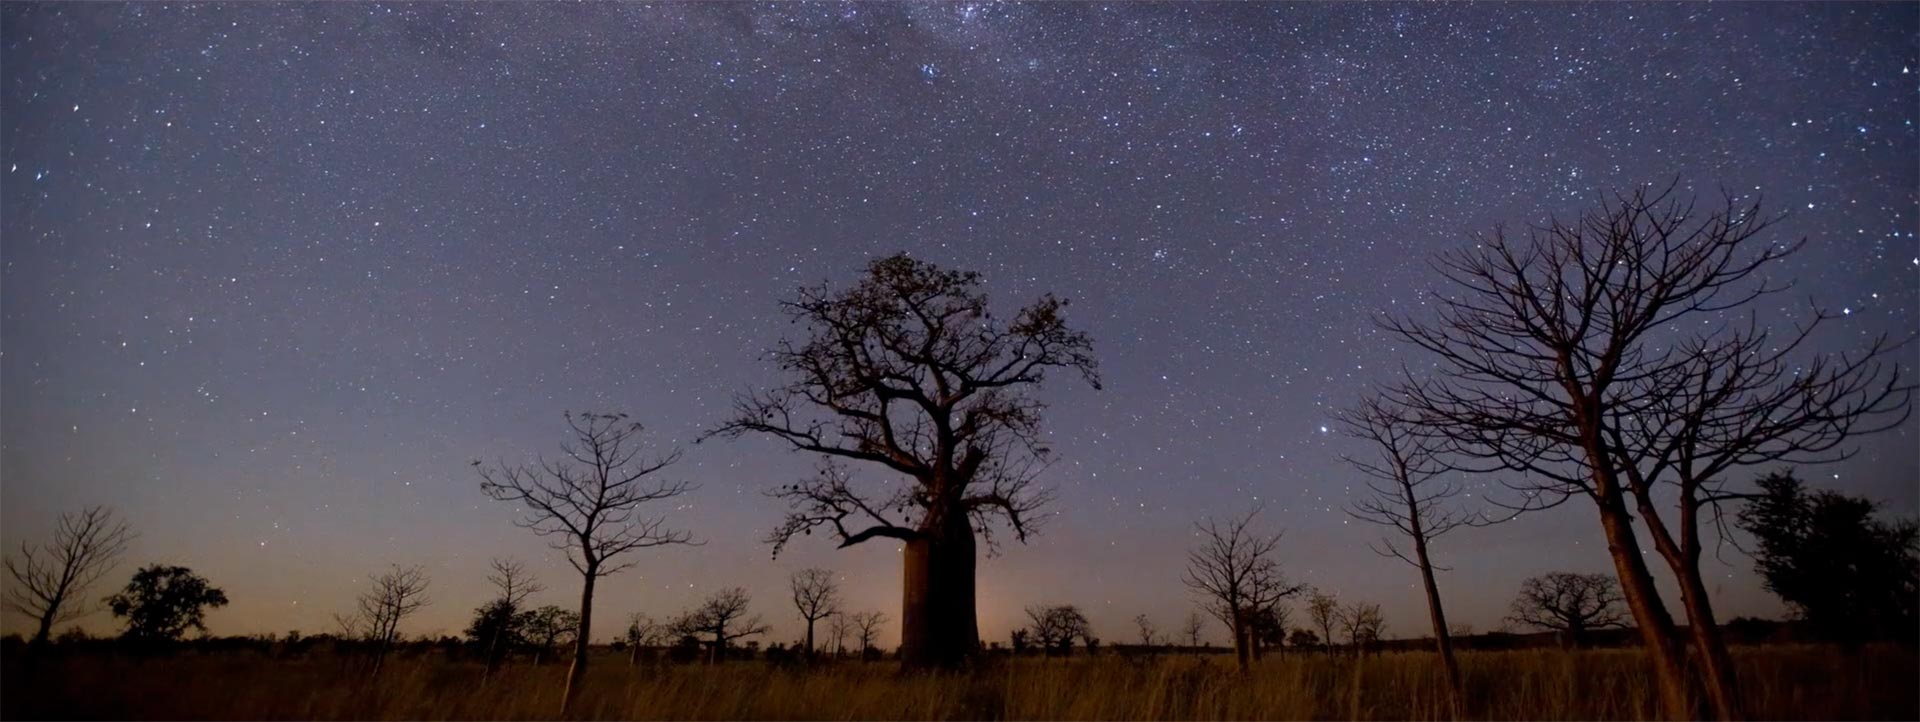 OUTBACK-SPIRIT-Kimberley-Cape-Leveque-tours-night-stars